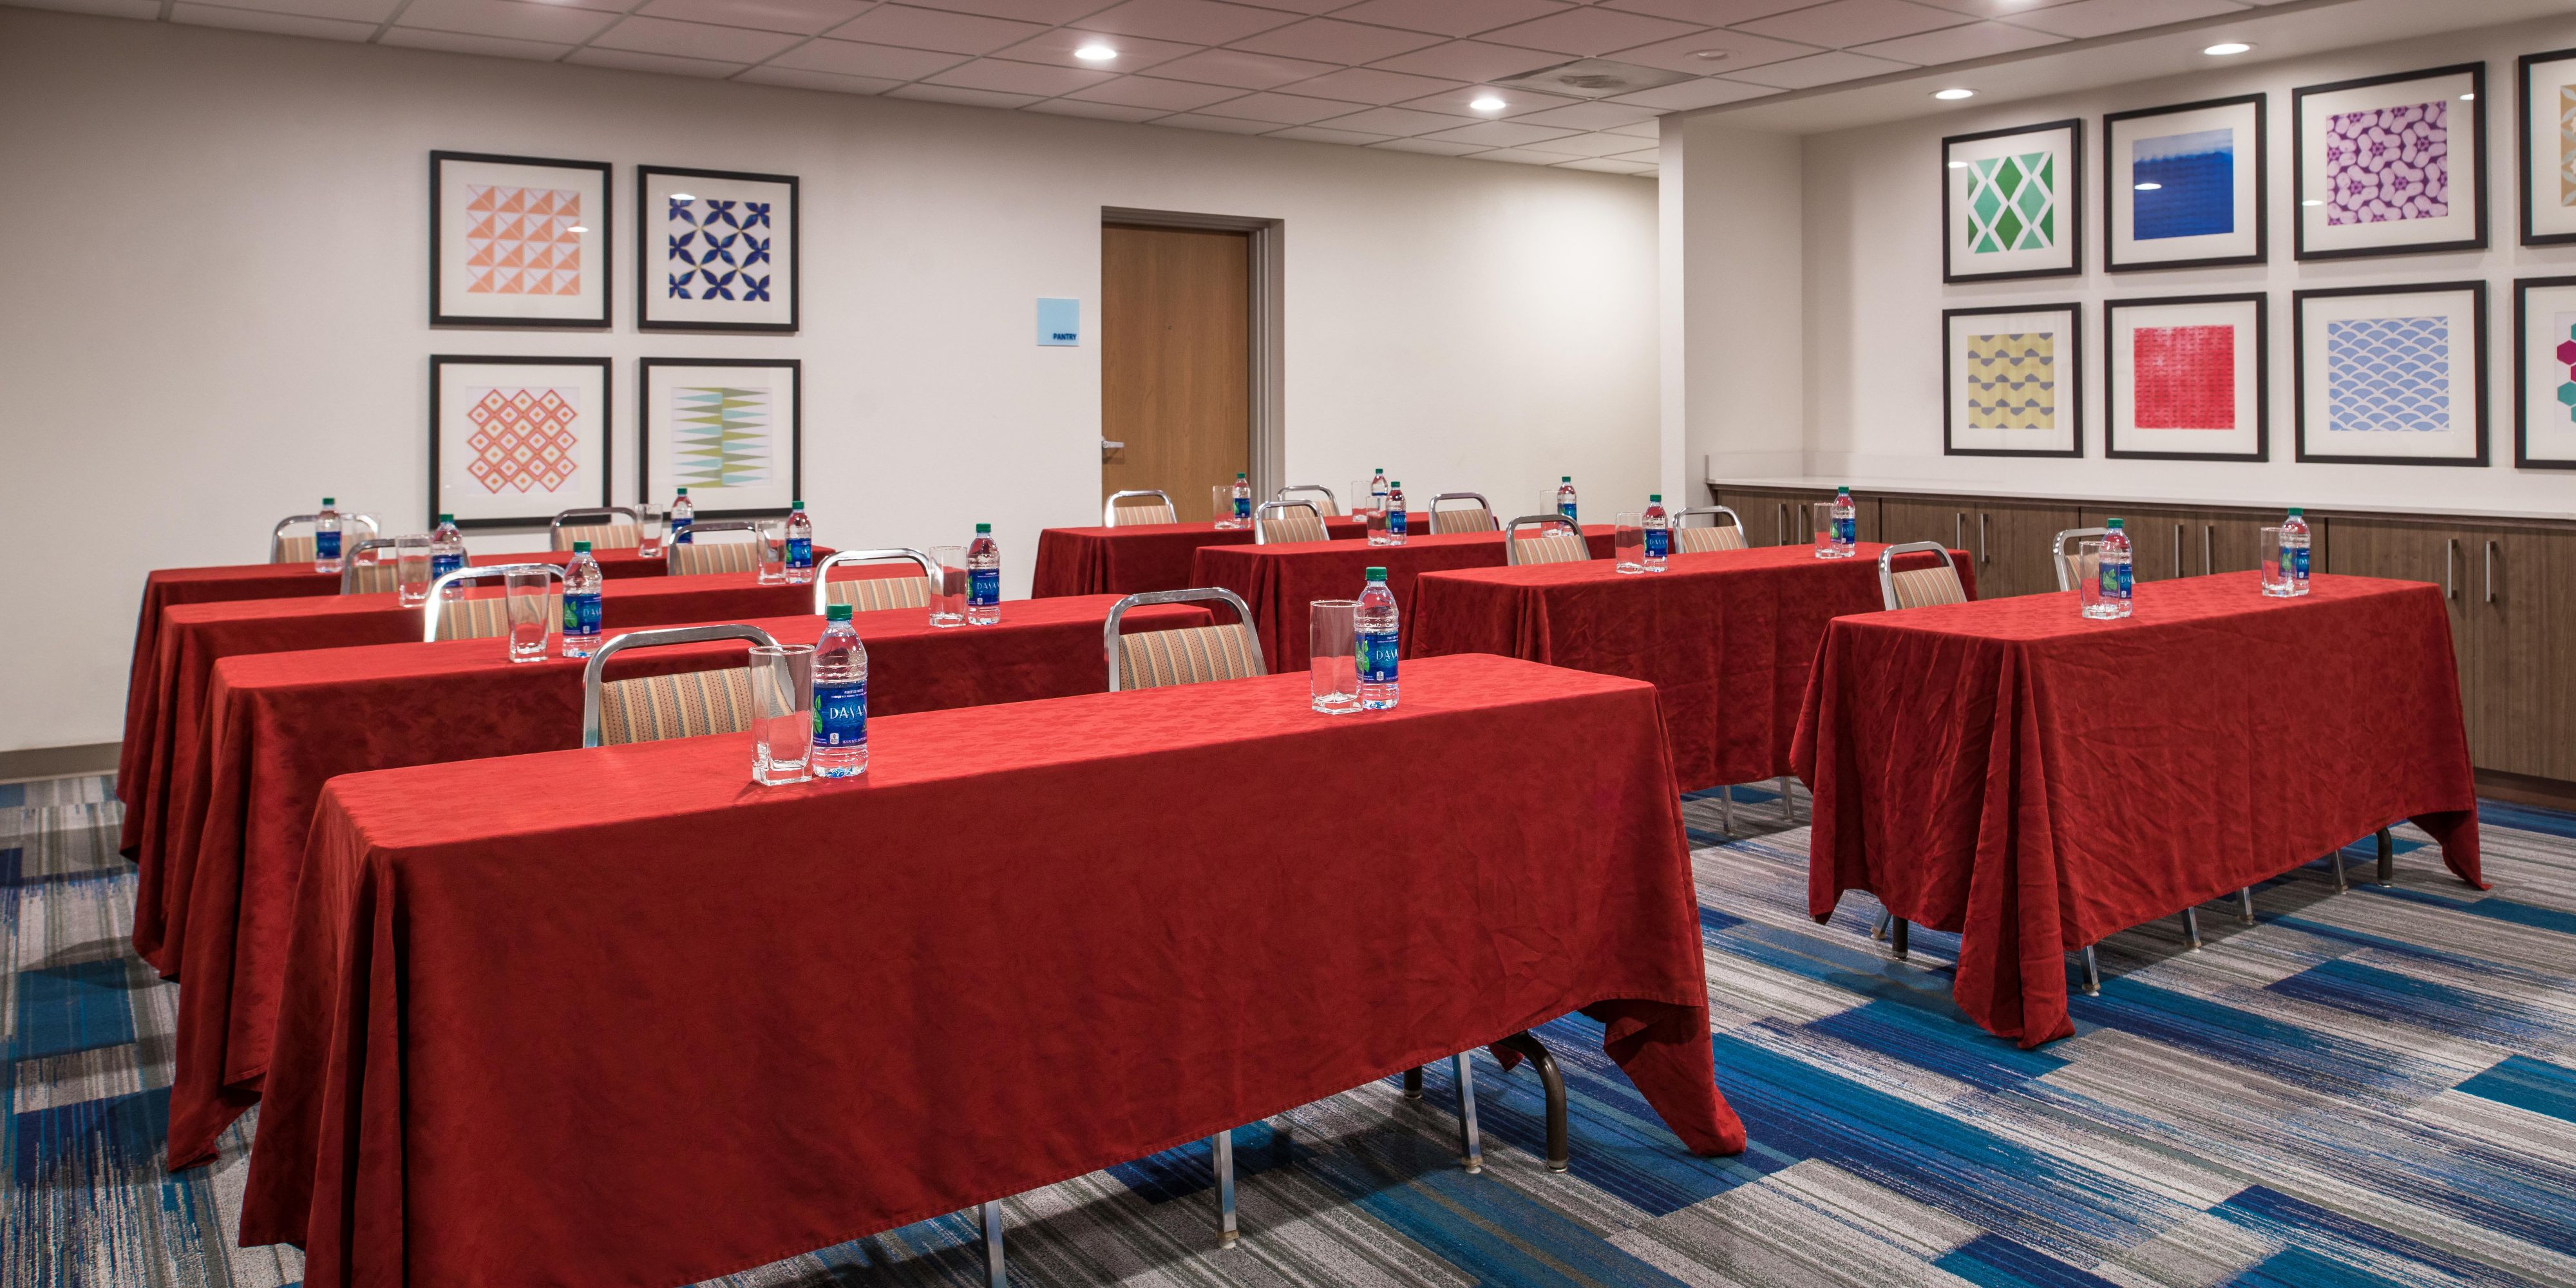 Our 500-sq-ft meeting space in Tampa, Florida can accommodate up to 40 people and is great for seminars and family reunions. Morning meetings can be catered by the Express Start Breakfast Bar, and assistance with off-site catering is available. Basic meeting supplies are included and A/V equipment is available to rent through a third party. 